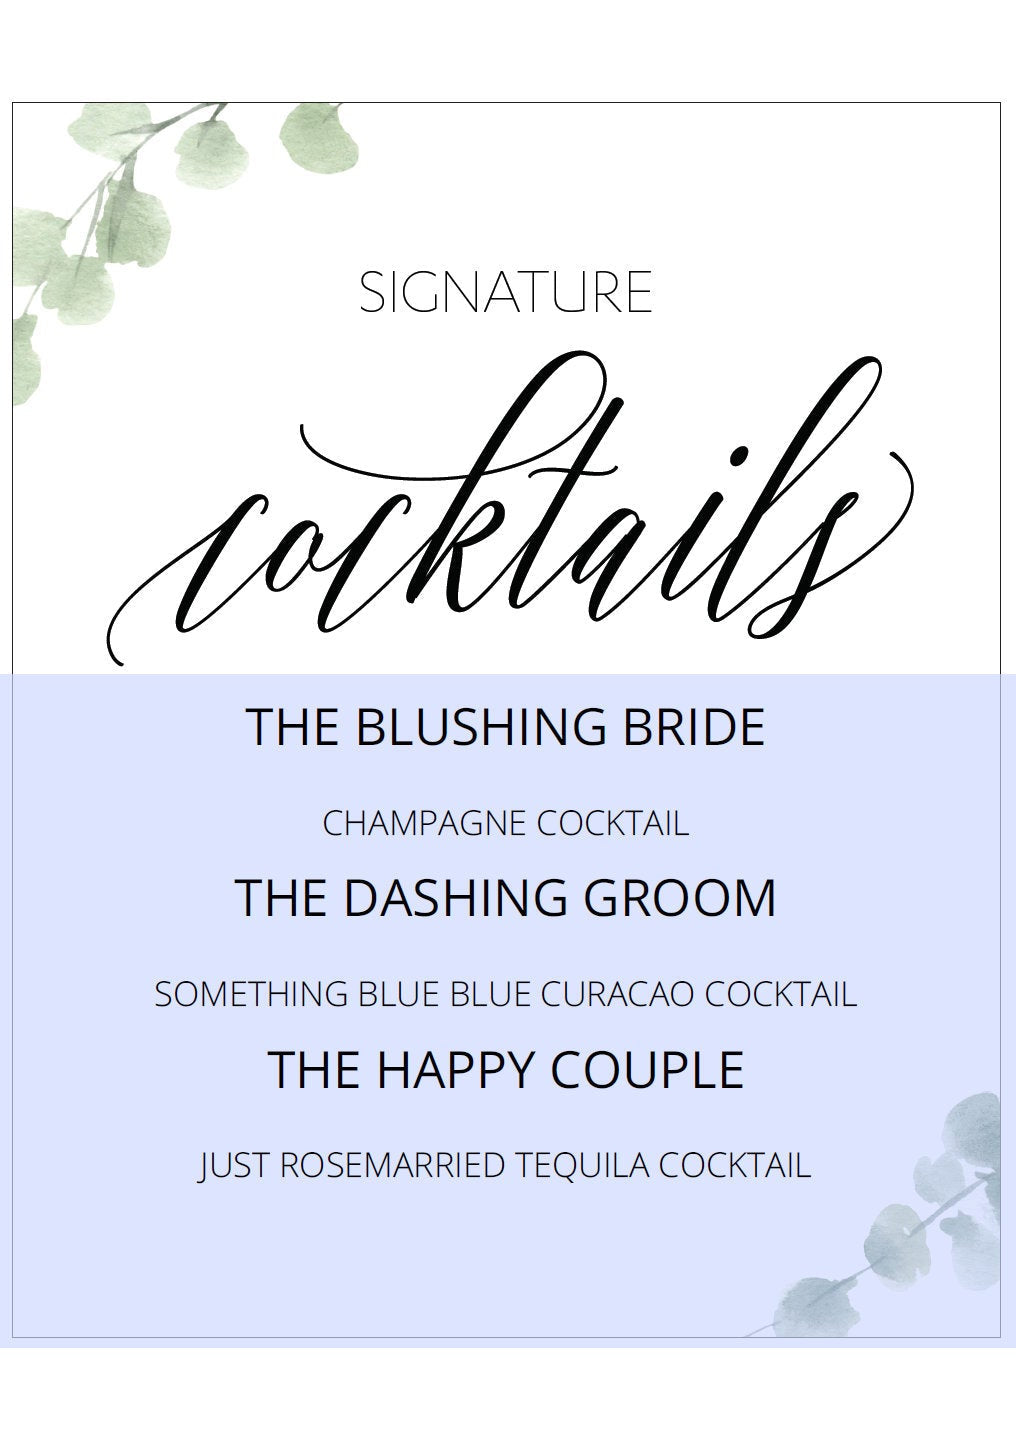 Wedding Bar Sign, Wedding Drink Sign, Bar Menu, DIY, Wedding signs, Signature Cocktails, Template, Instant Download, Wedding Decor SIGNS | PHOTO BOOTH SAVVY PAPER CO